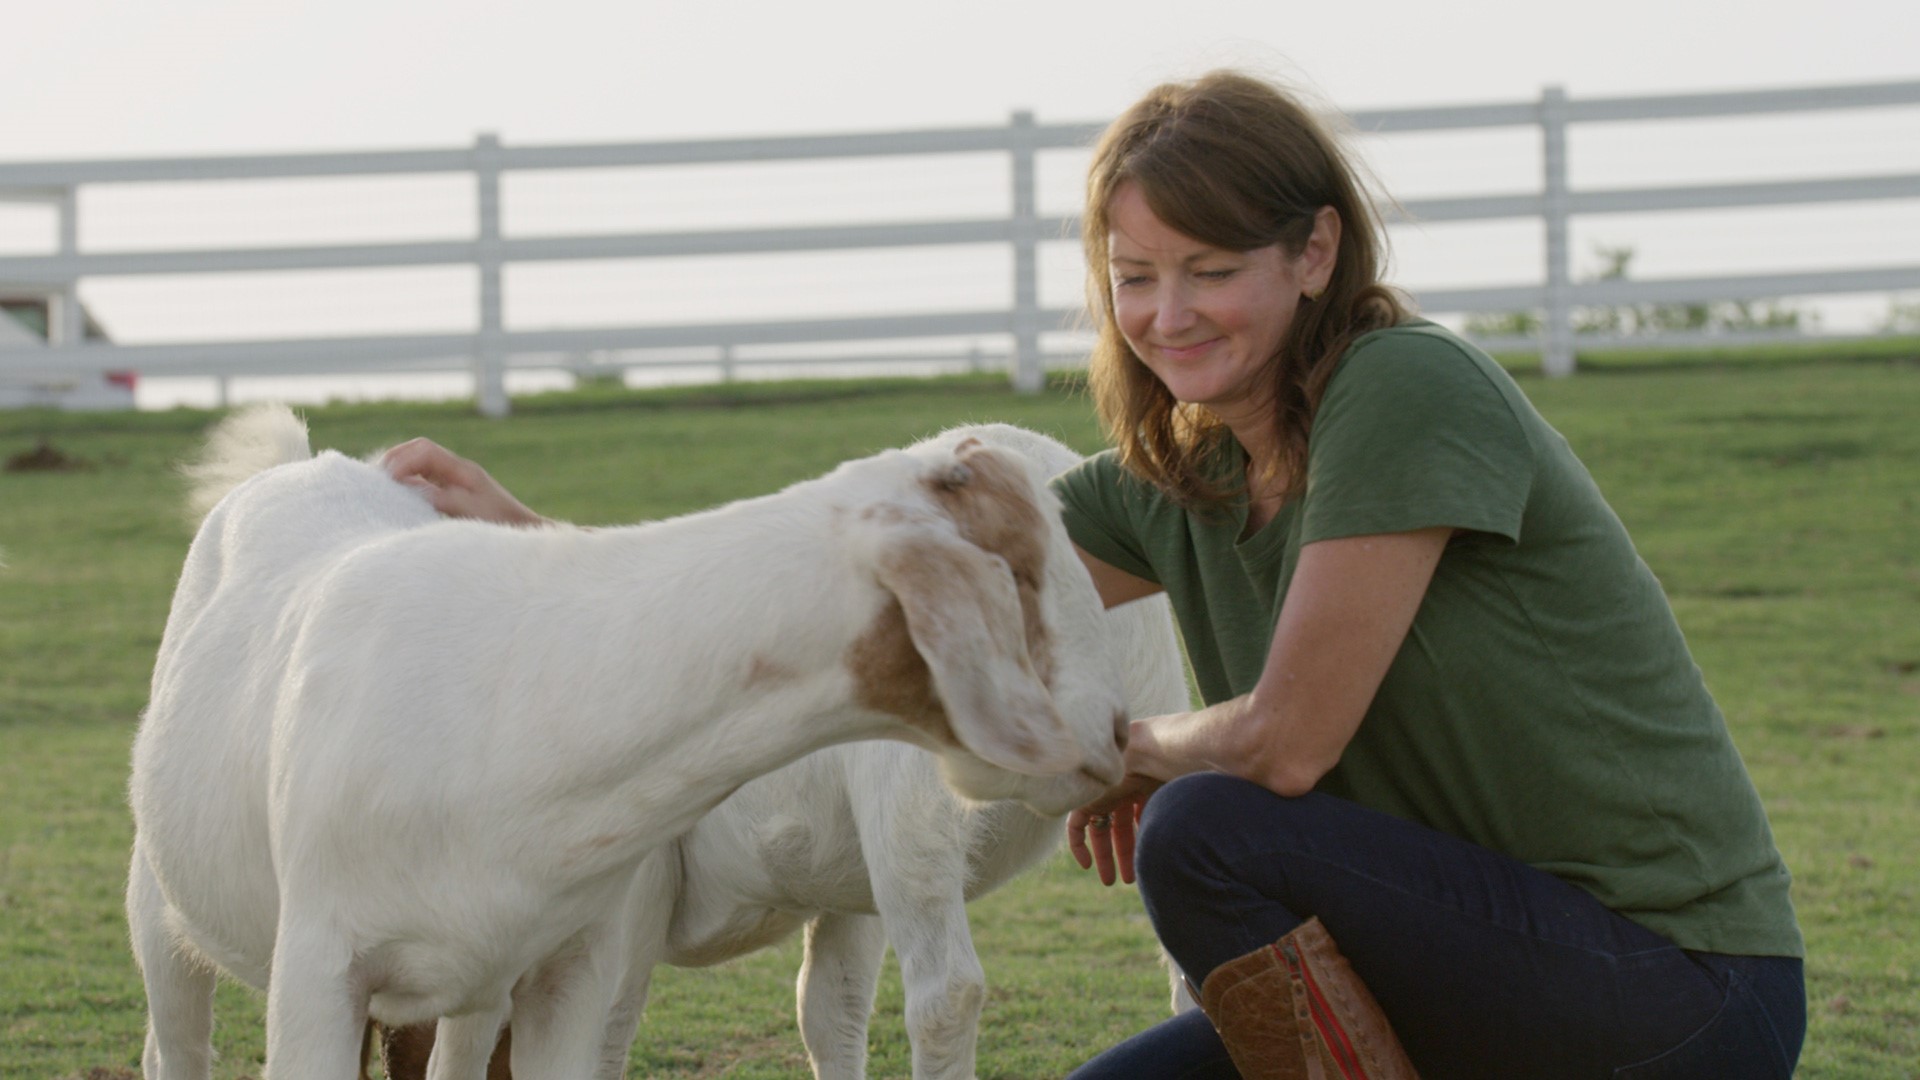 Rescuing animals and rescuing complexions, Shannon McLinden of Farmhouse Fresh sets a high bar for corporate responsibility.